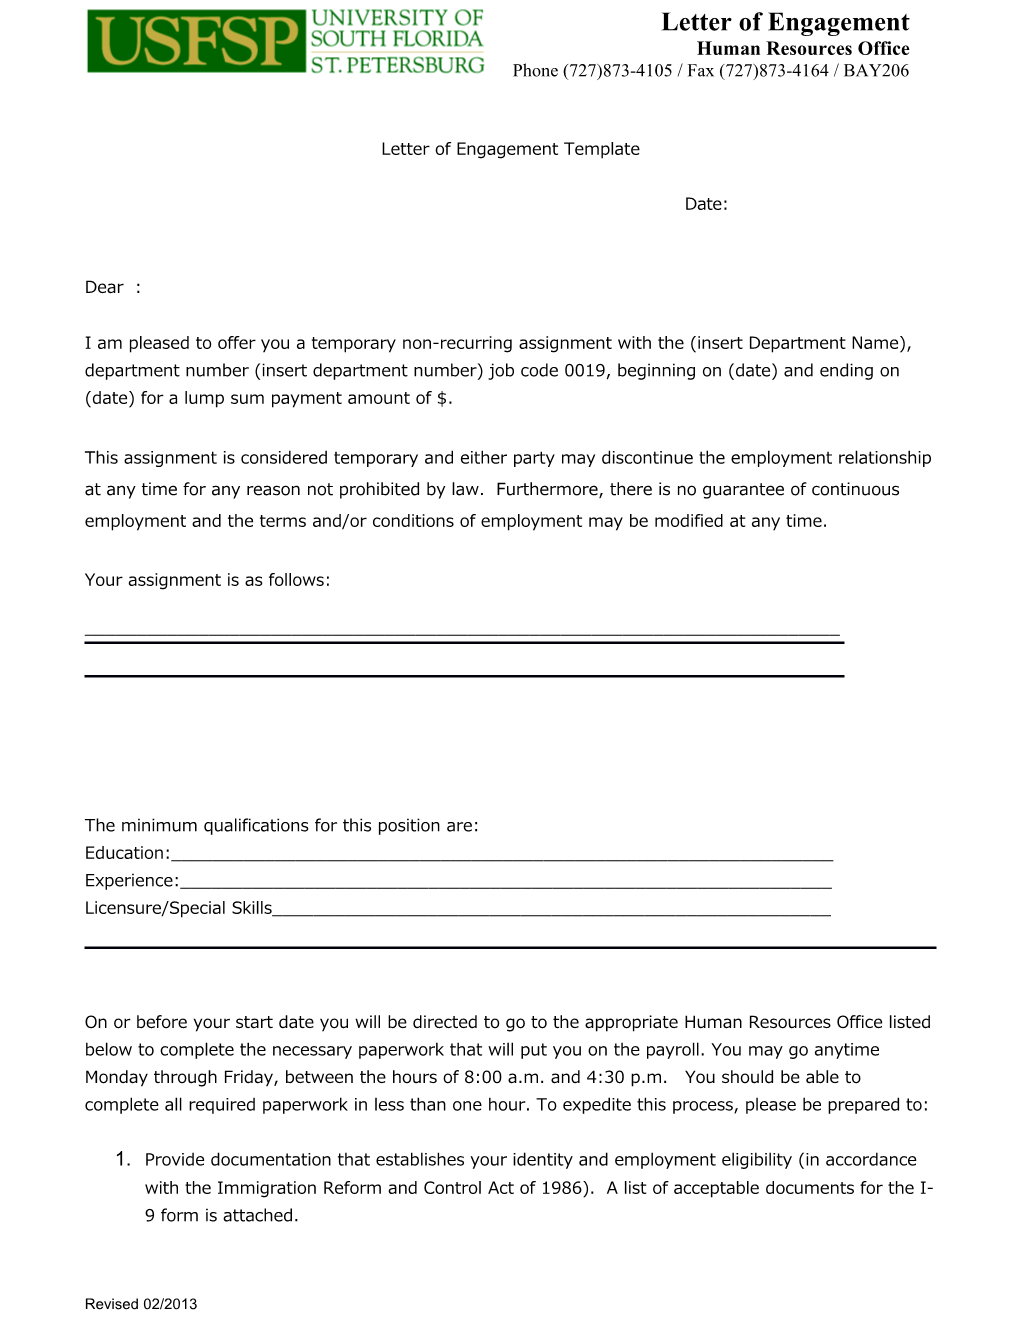 Letter of Engagement Template